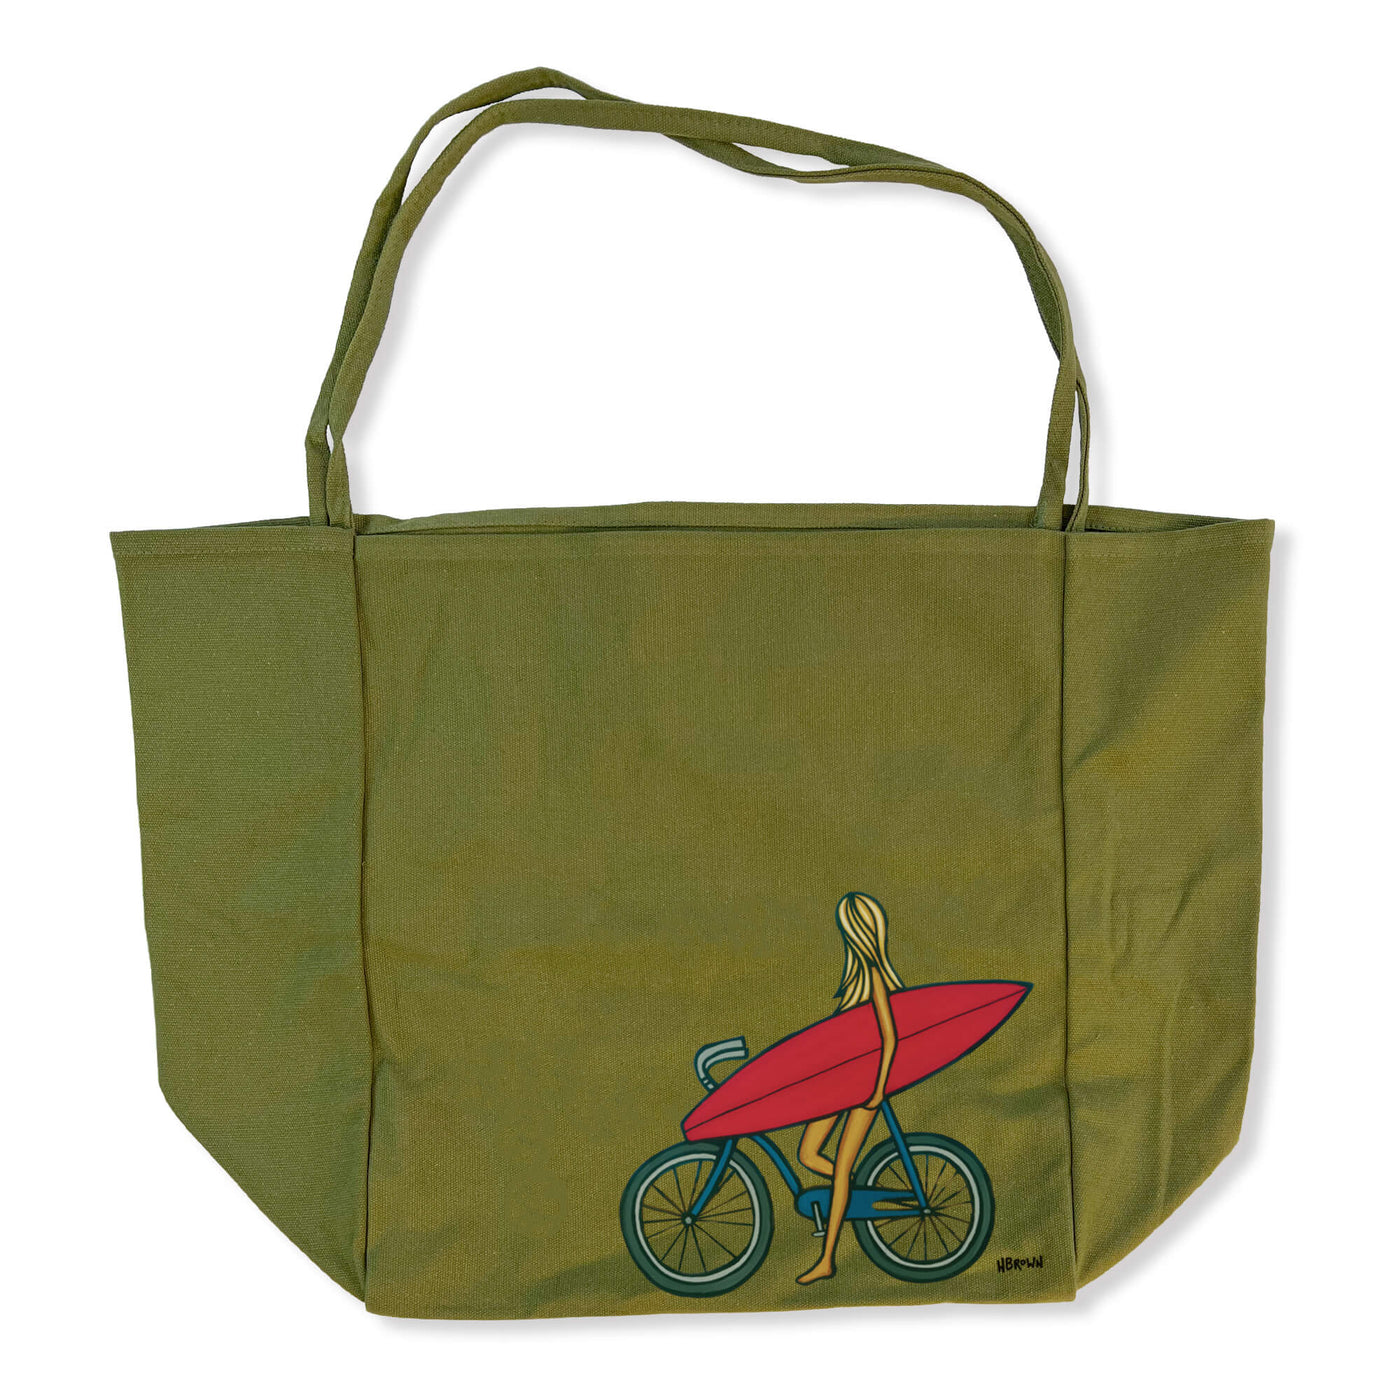 An olive thin handle tote bag featuring a girl heading to the beach for a day of surf and sea by Hawaii surf artist Heather Brown